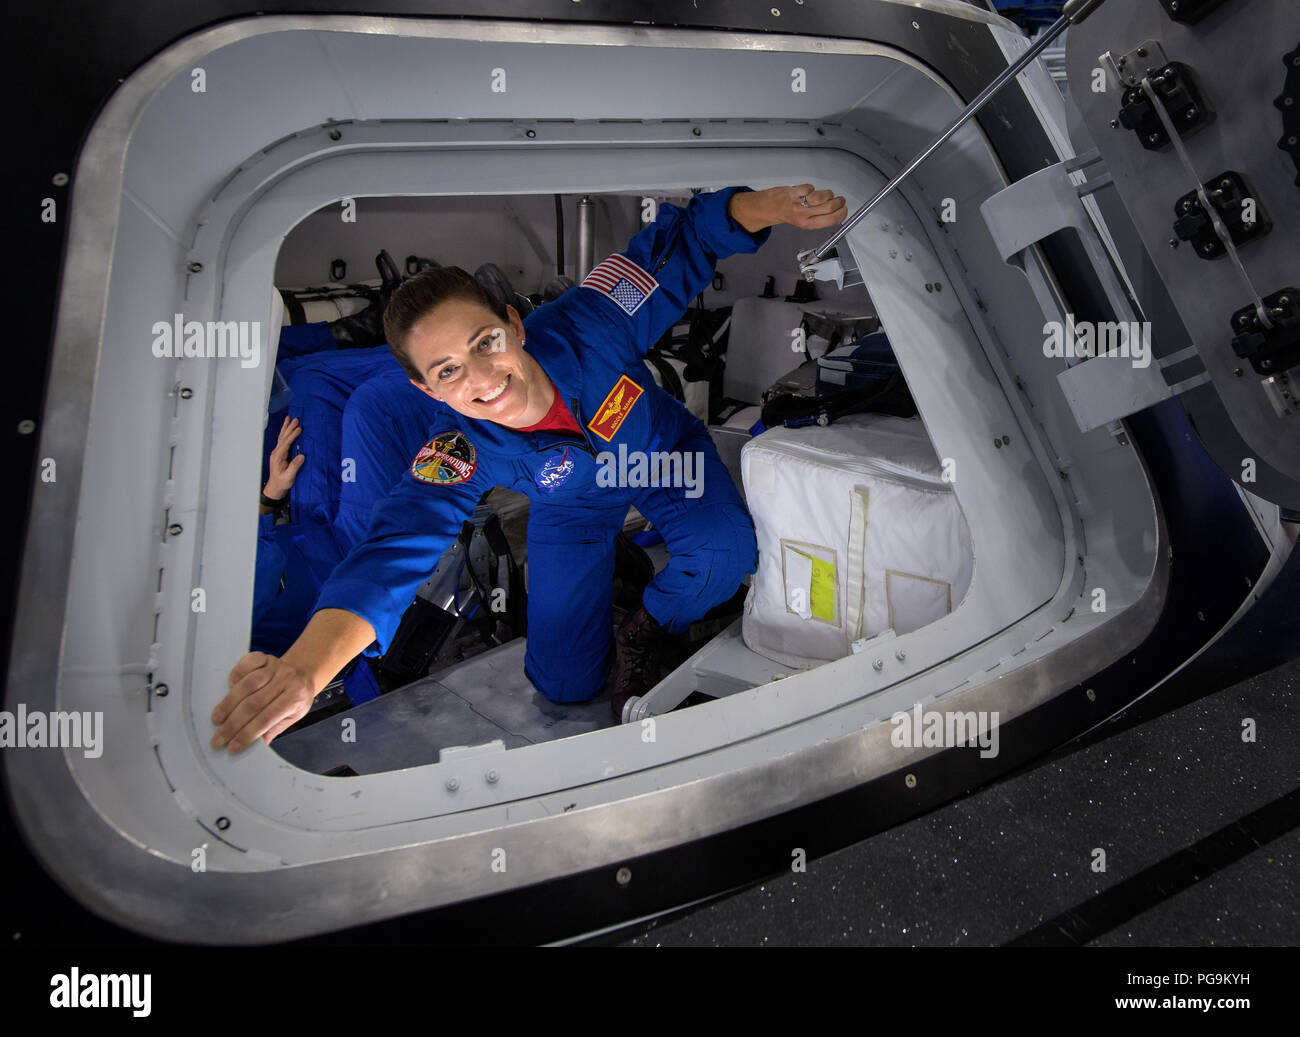 NASA astronaut Nicole Mann poses for a photograph as she exits the Boeing Mockup Trainer at NASA’s Johnson Space Center in Houston, Texas on Aug. 2, 2018 ahead of the commercial crew flight assignments announcement Aug. 3. Mann, along with NASA astronaut Eric Boe and Boeing astronaut Chris Ferguson were assigned to launch aboard Boeing’s CST-100 Starliner on the company’s Crew Flight Test targeted for mid-2019 in partnership with NASA’s Commercial Crew Program. Stock Photo